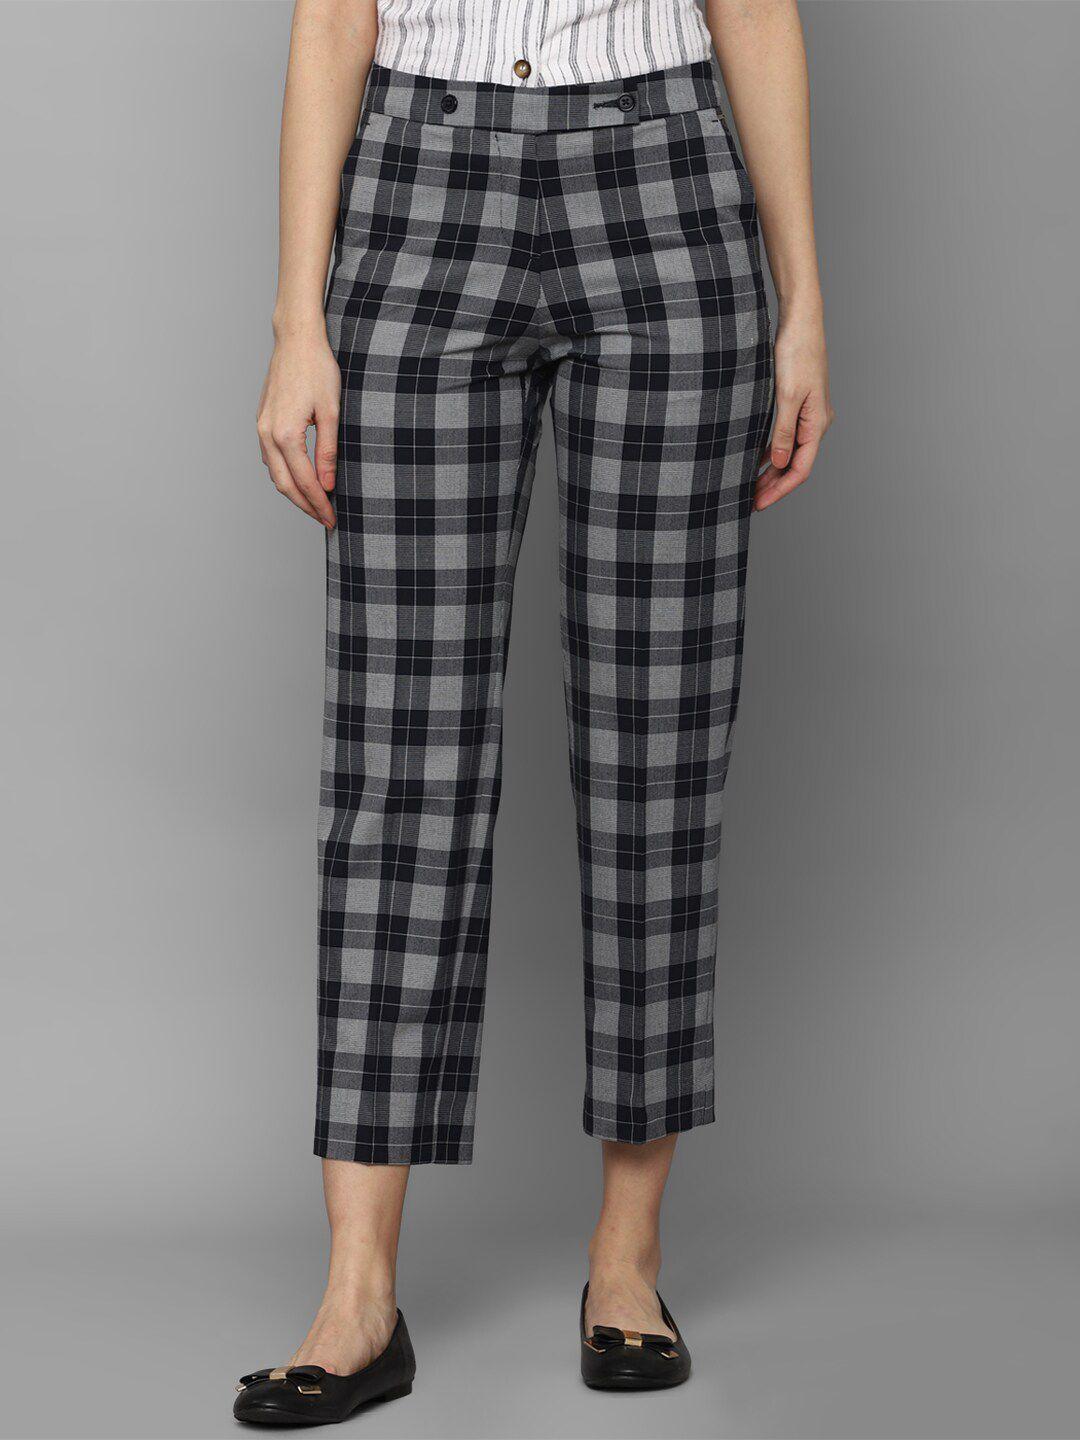 allen-solly-woman-women-black-checked-regular-fit-trousers